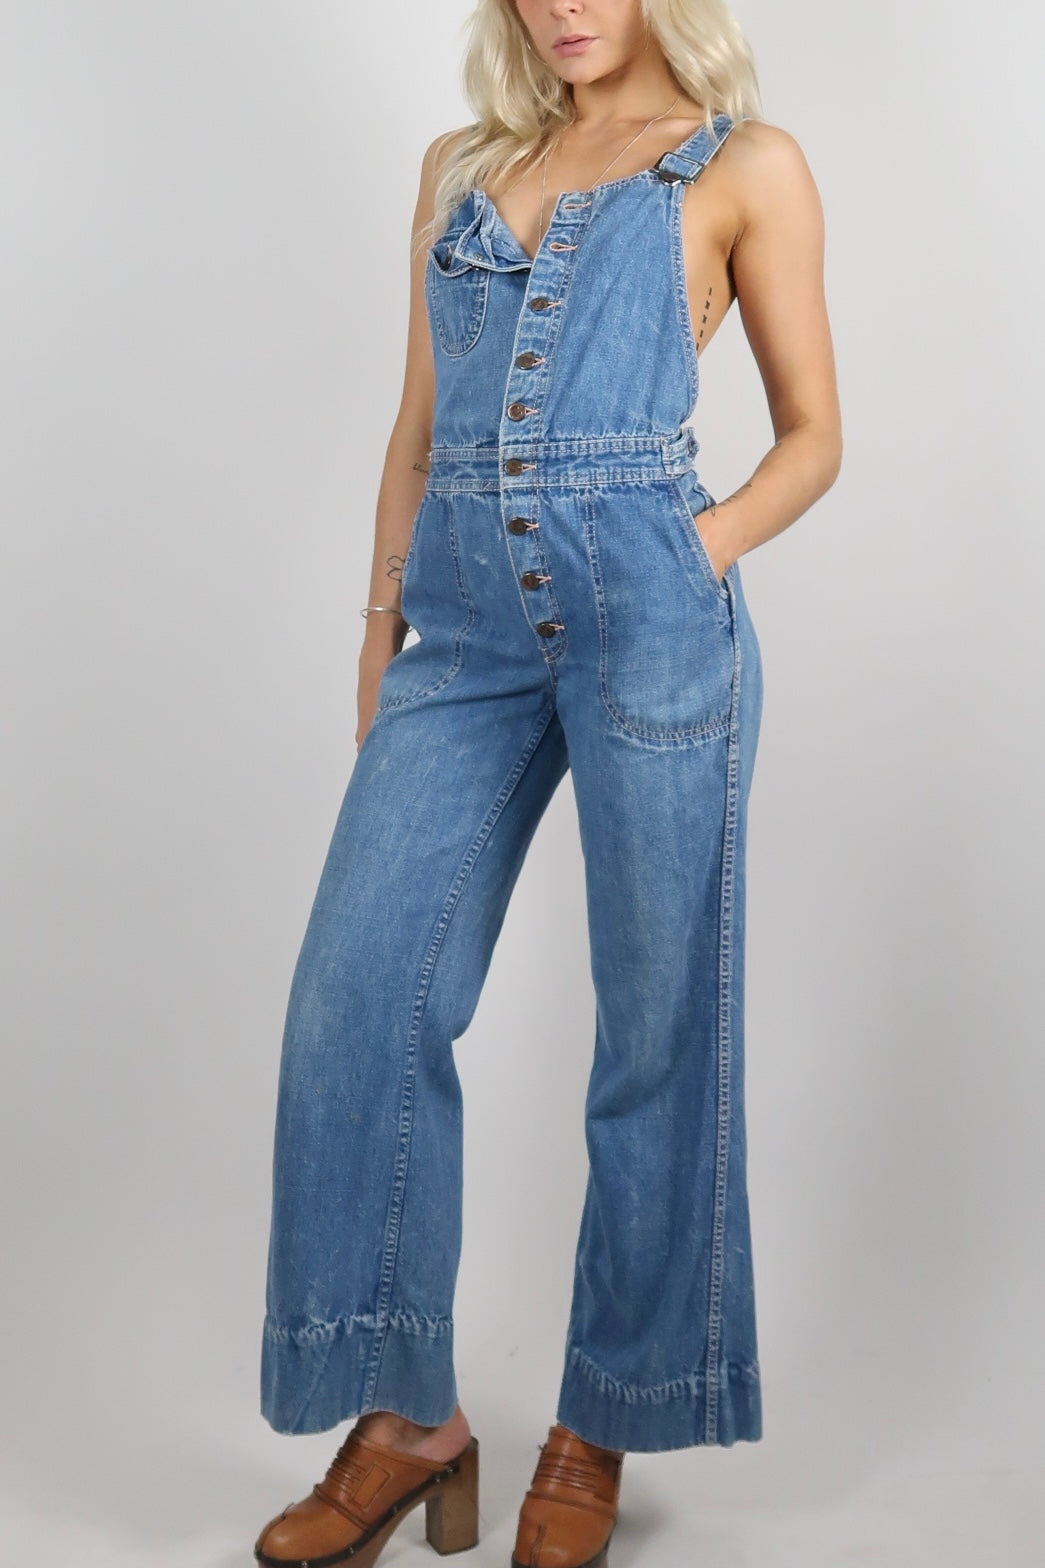 1970s dungaree overalls